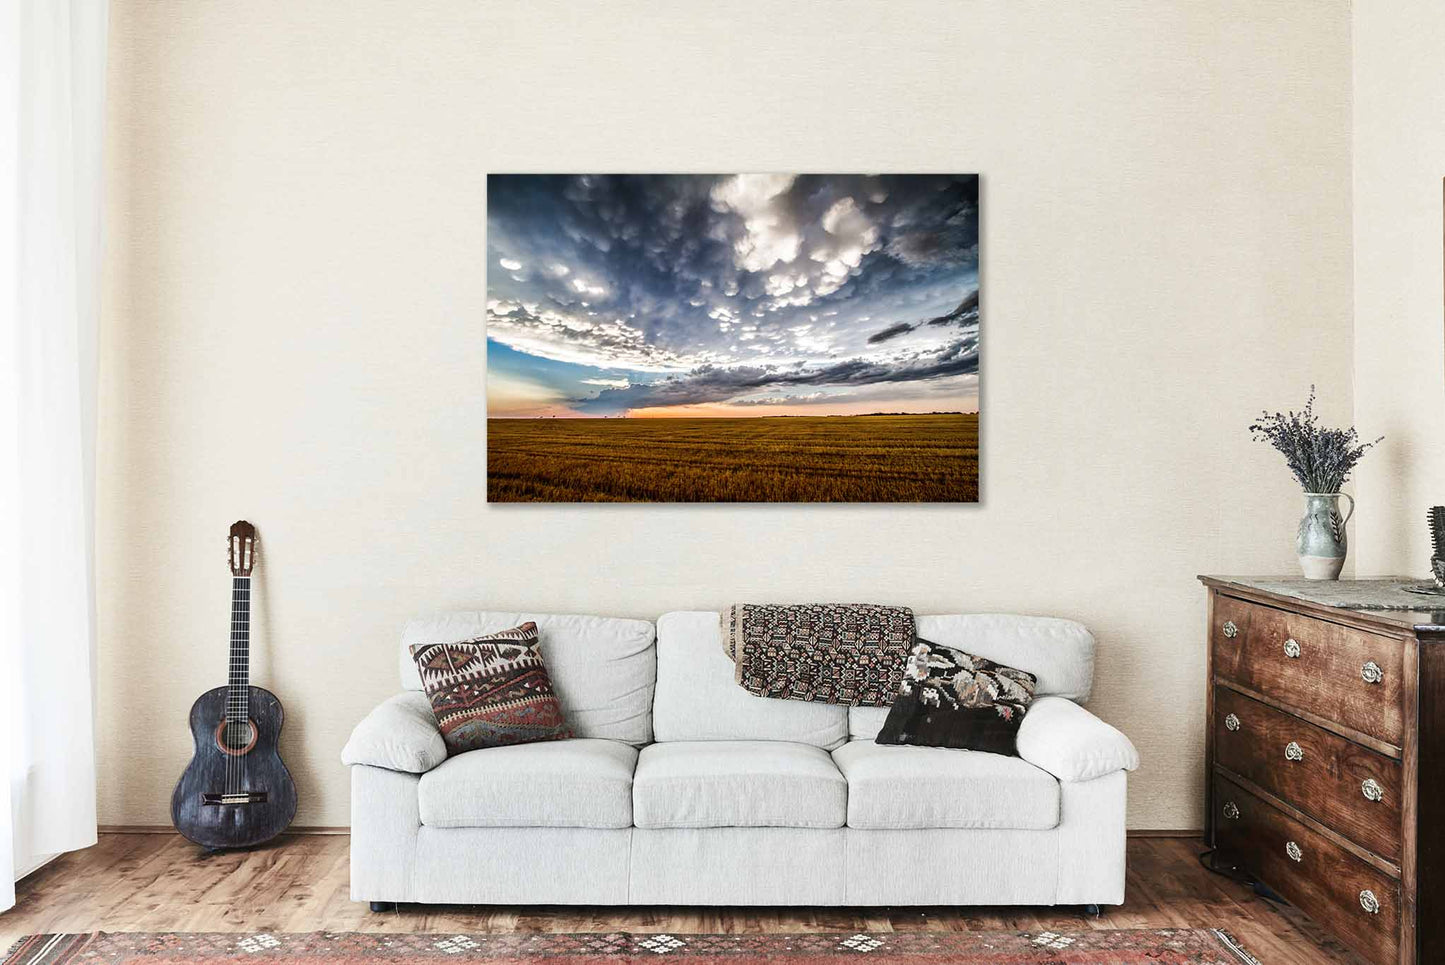 Great Plains Metal Print (Ready to Hang) Photo of Clouds Over Field at Sunset After Stormy Evening in Texas Sky Wall Art Western Decor